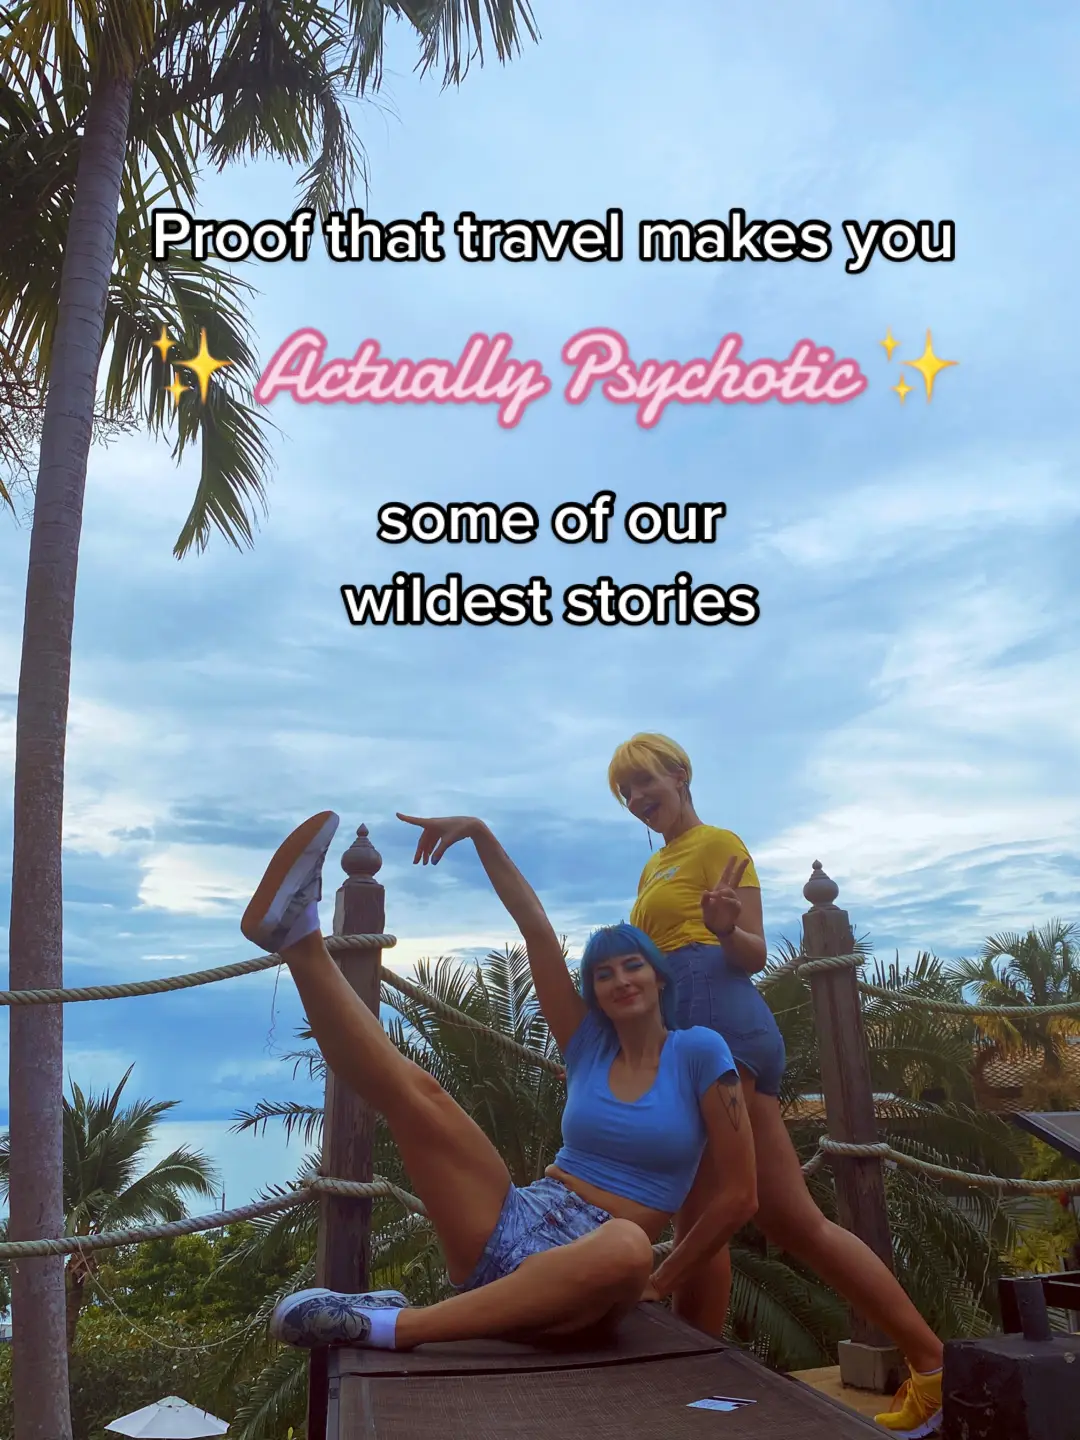 When you put it like this, it really was pretty unhinged 😅 #thailand #travelers #traveltiktok #travellife #traveltheworld 